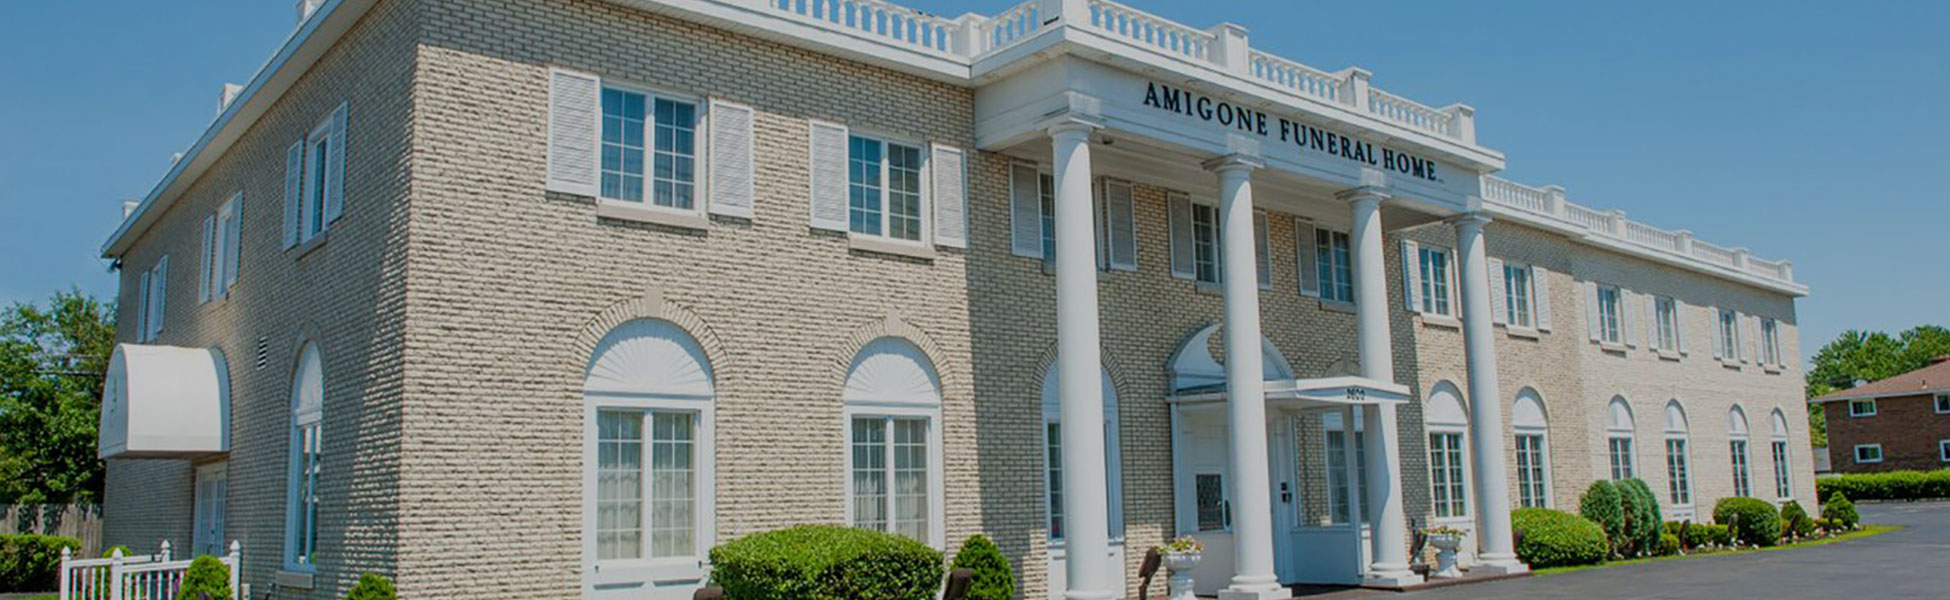 amigone funeral home cleveland drive